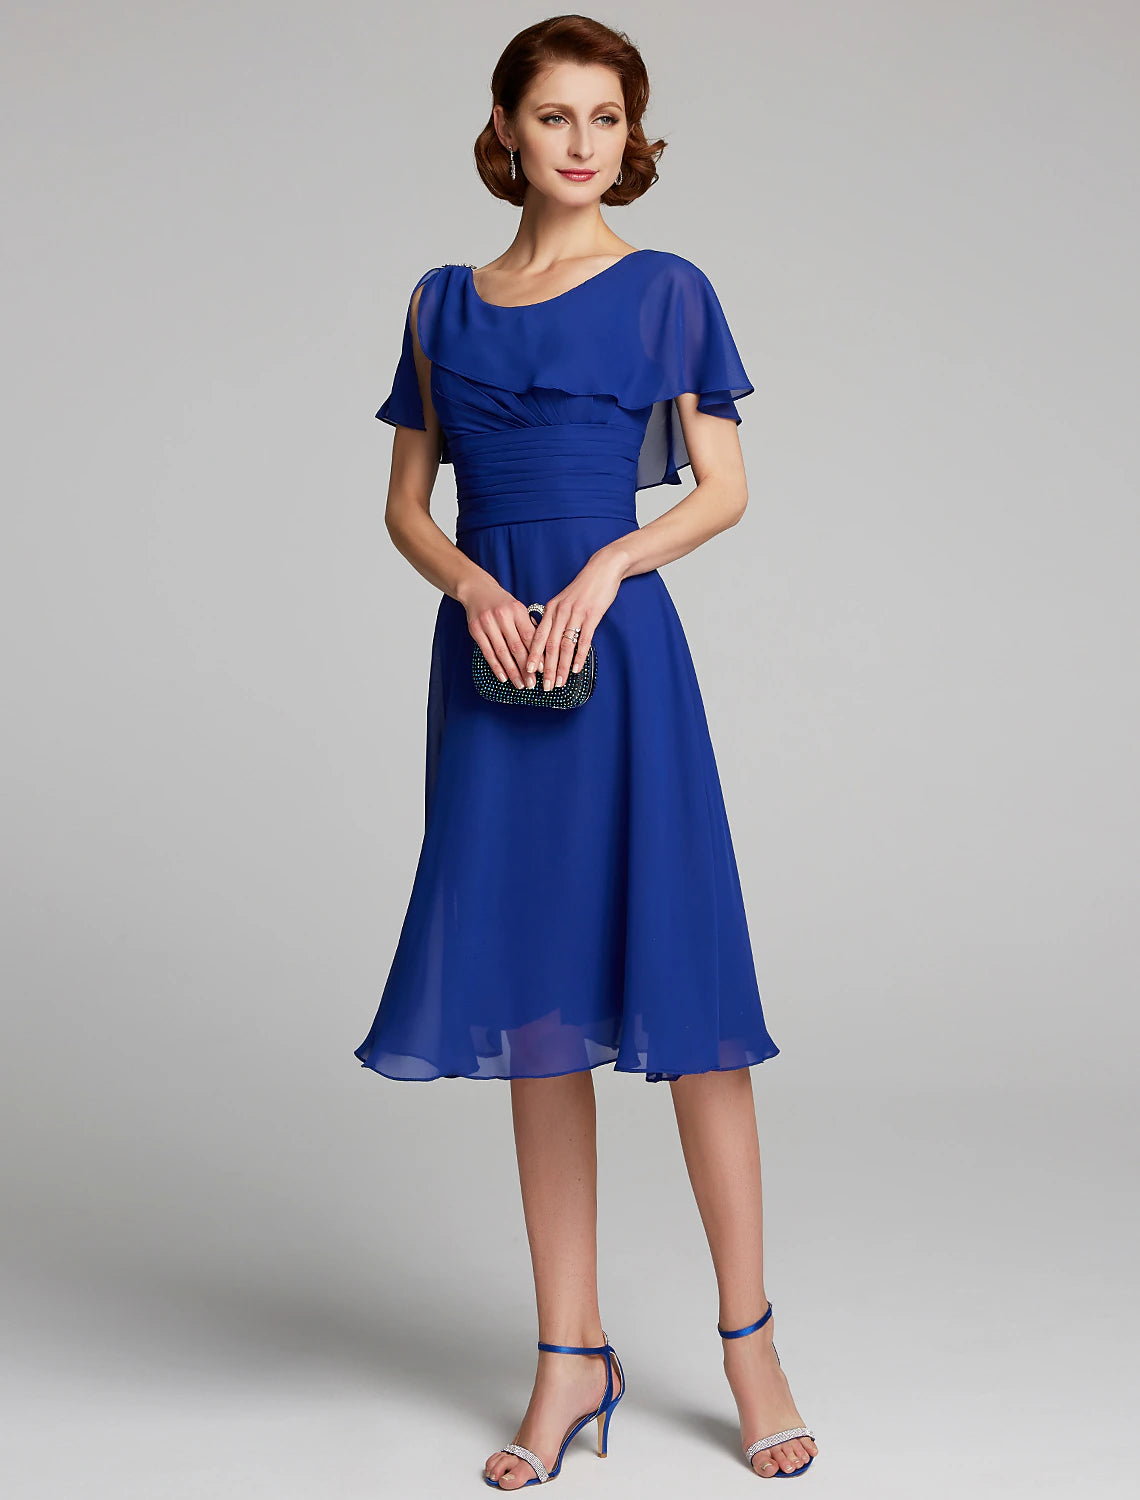 A-Line Mother of the Bride Dress Cowl Neck Knee Length Chiffon Short Sleeve with Ruffles